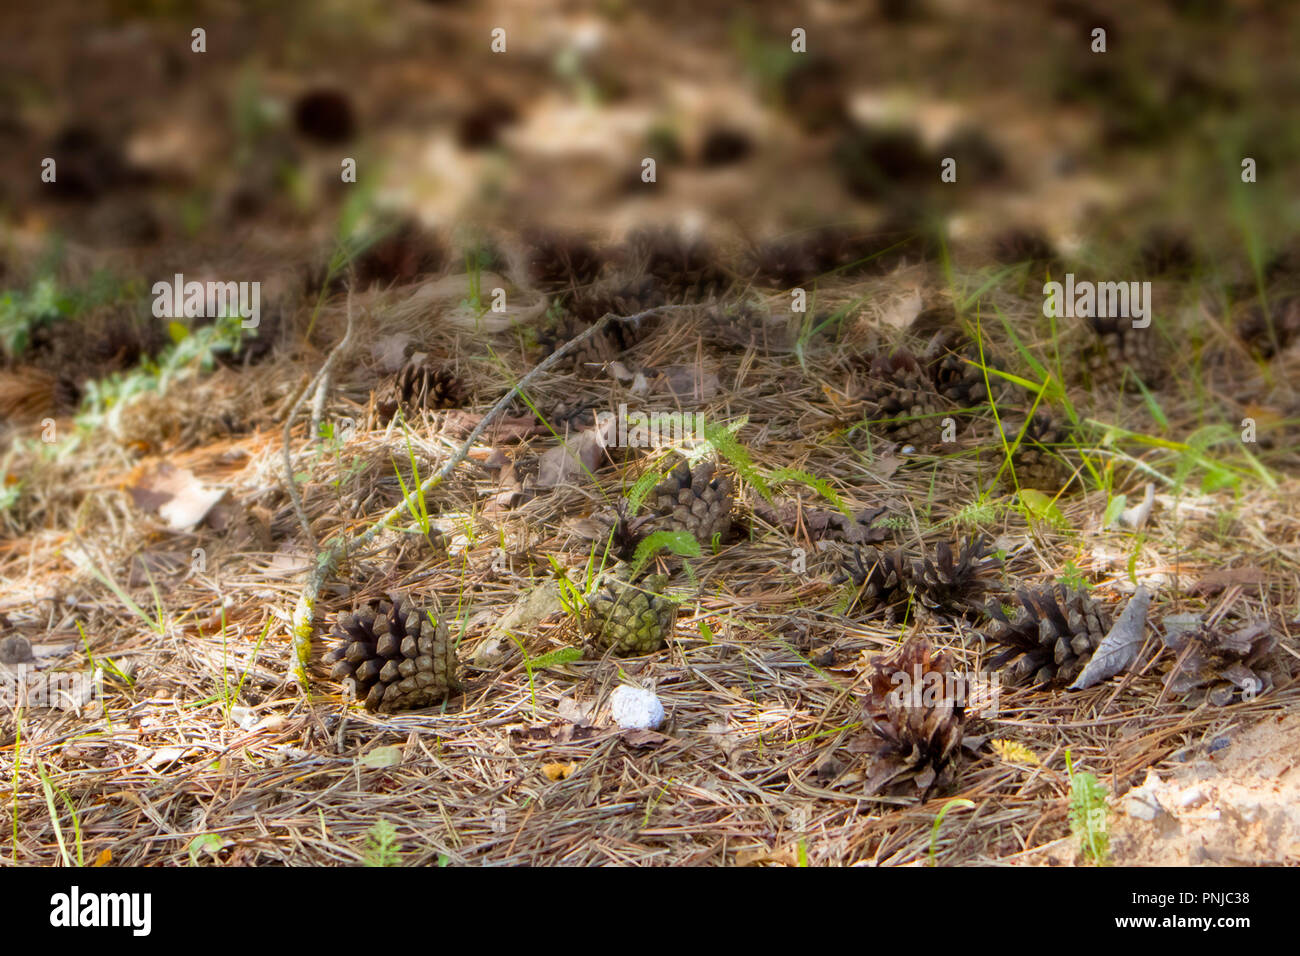 Fallen opened ripe pine cones lying on the forest field against blurred background Stock Photo